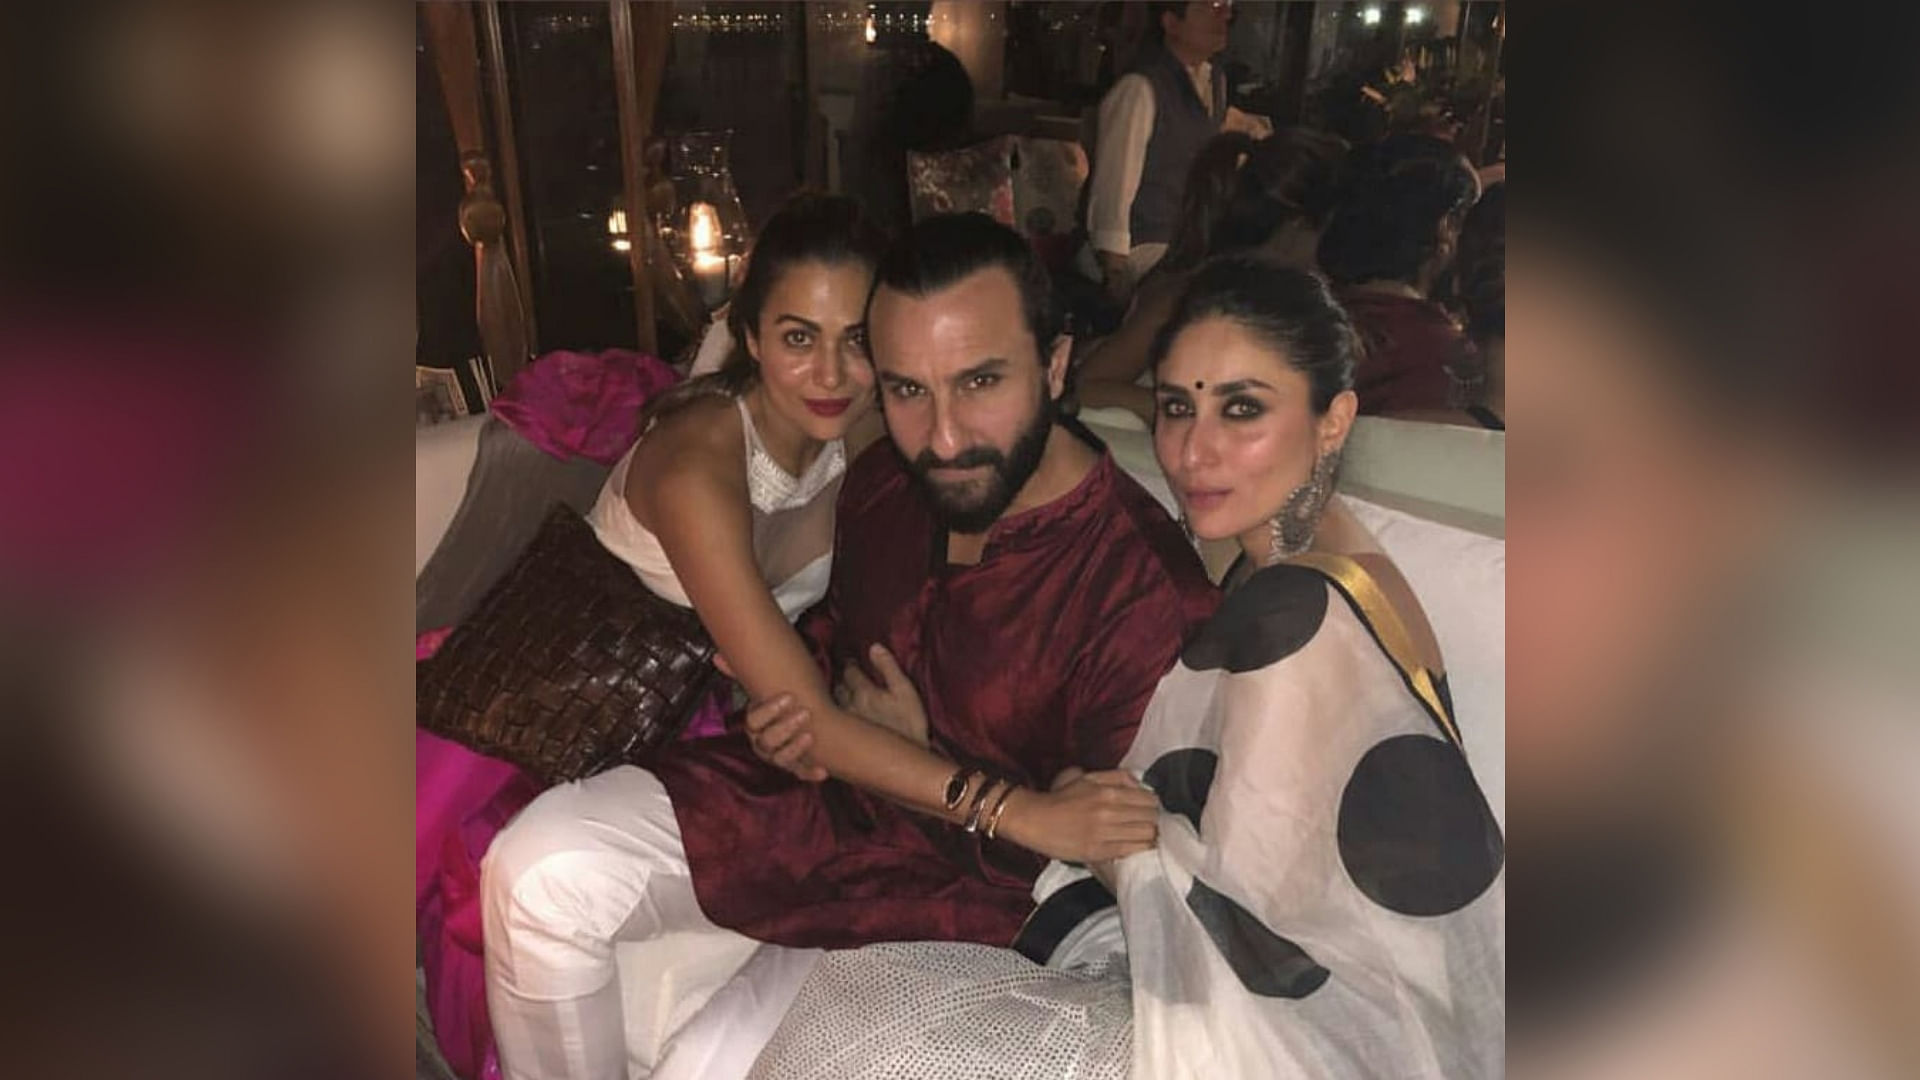 Kareena Kapoor celebrated Diwali with close friends and family.